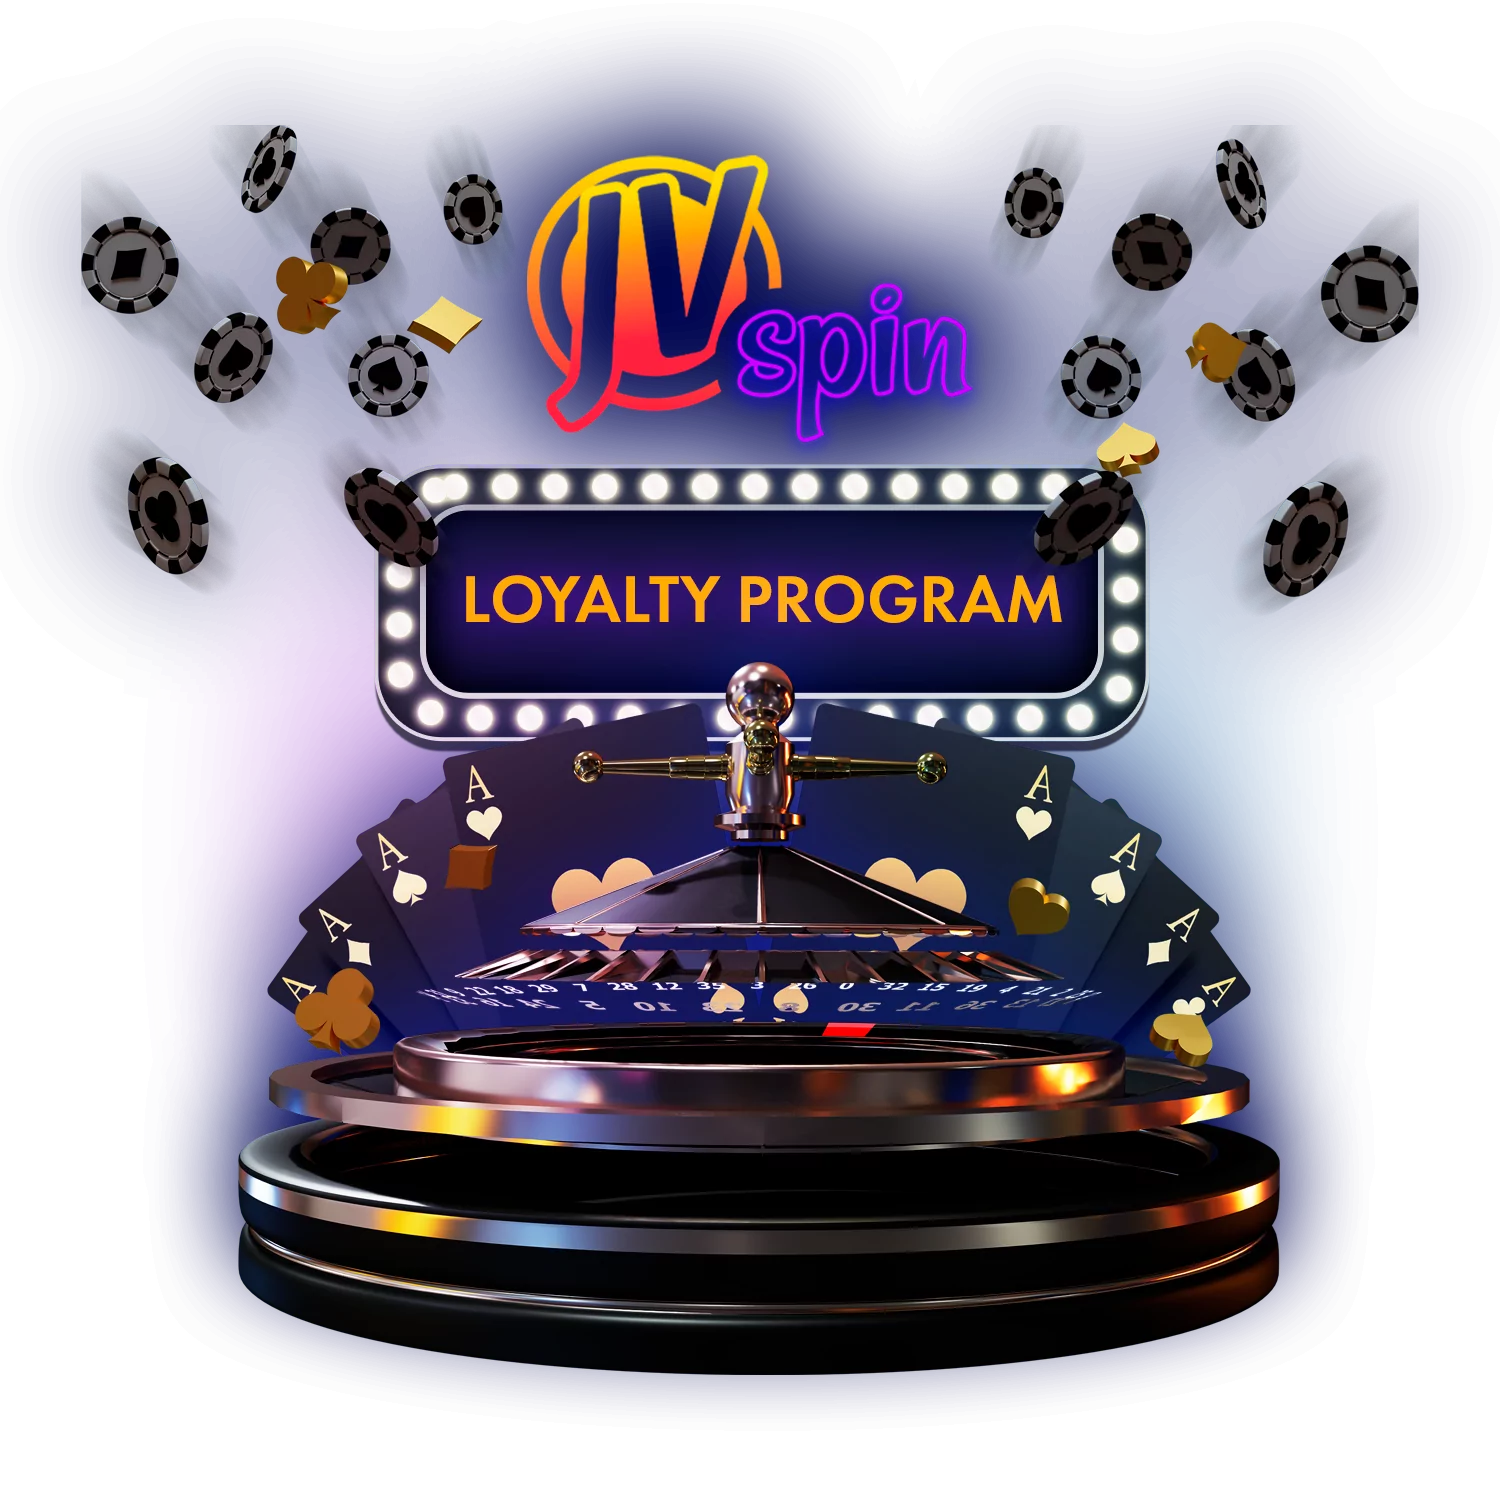 For the users who are going to play slots regularly, the JVSpin Casino team created a loyalty program.